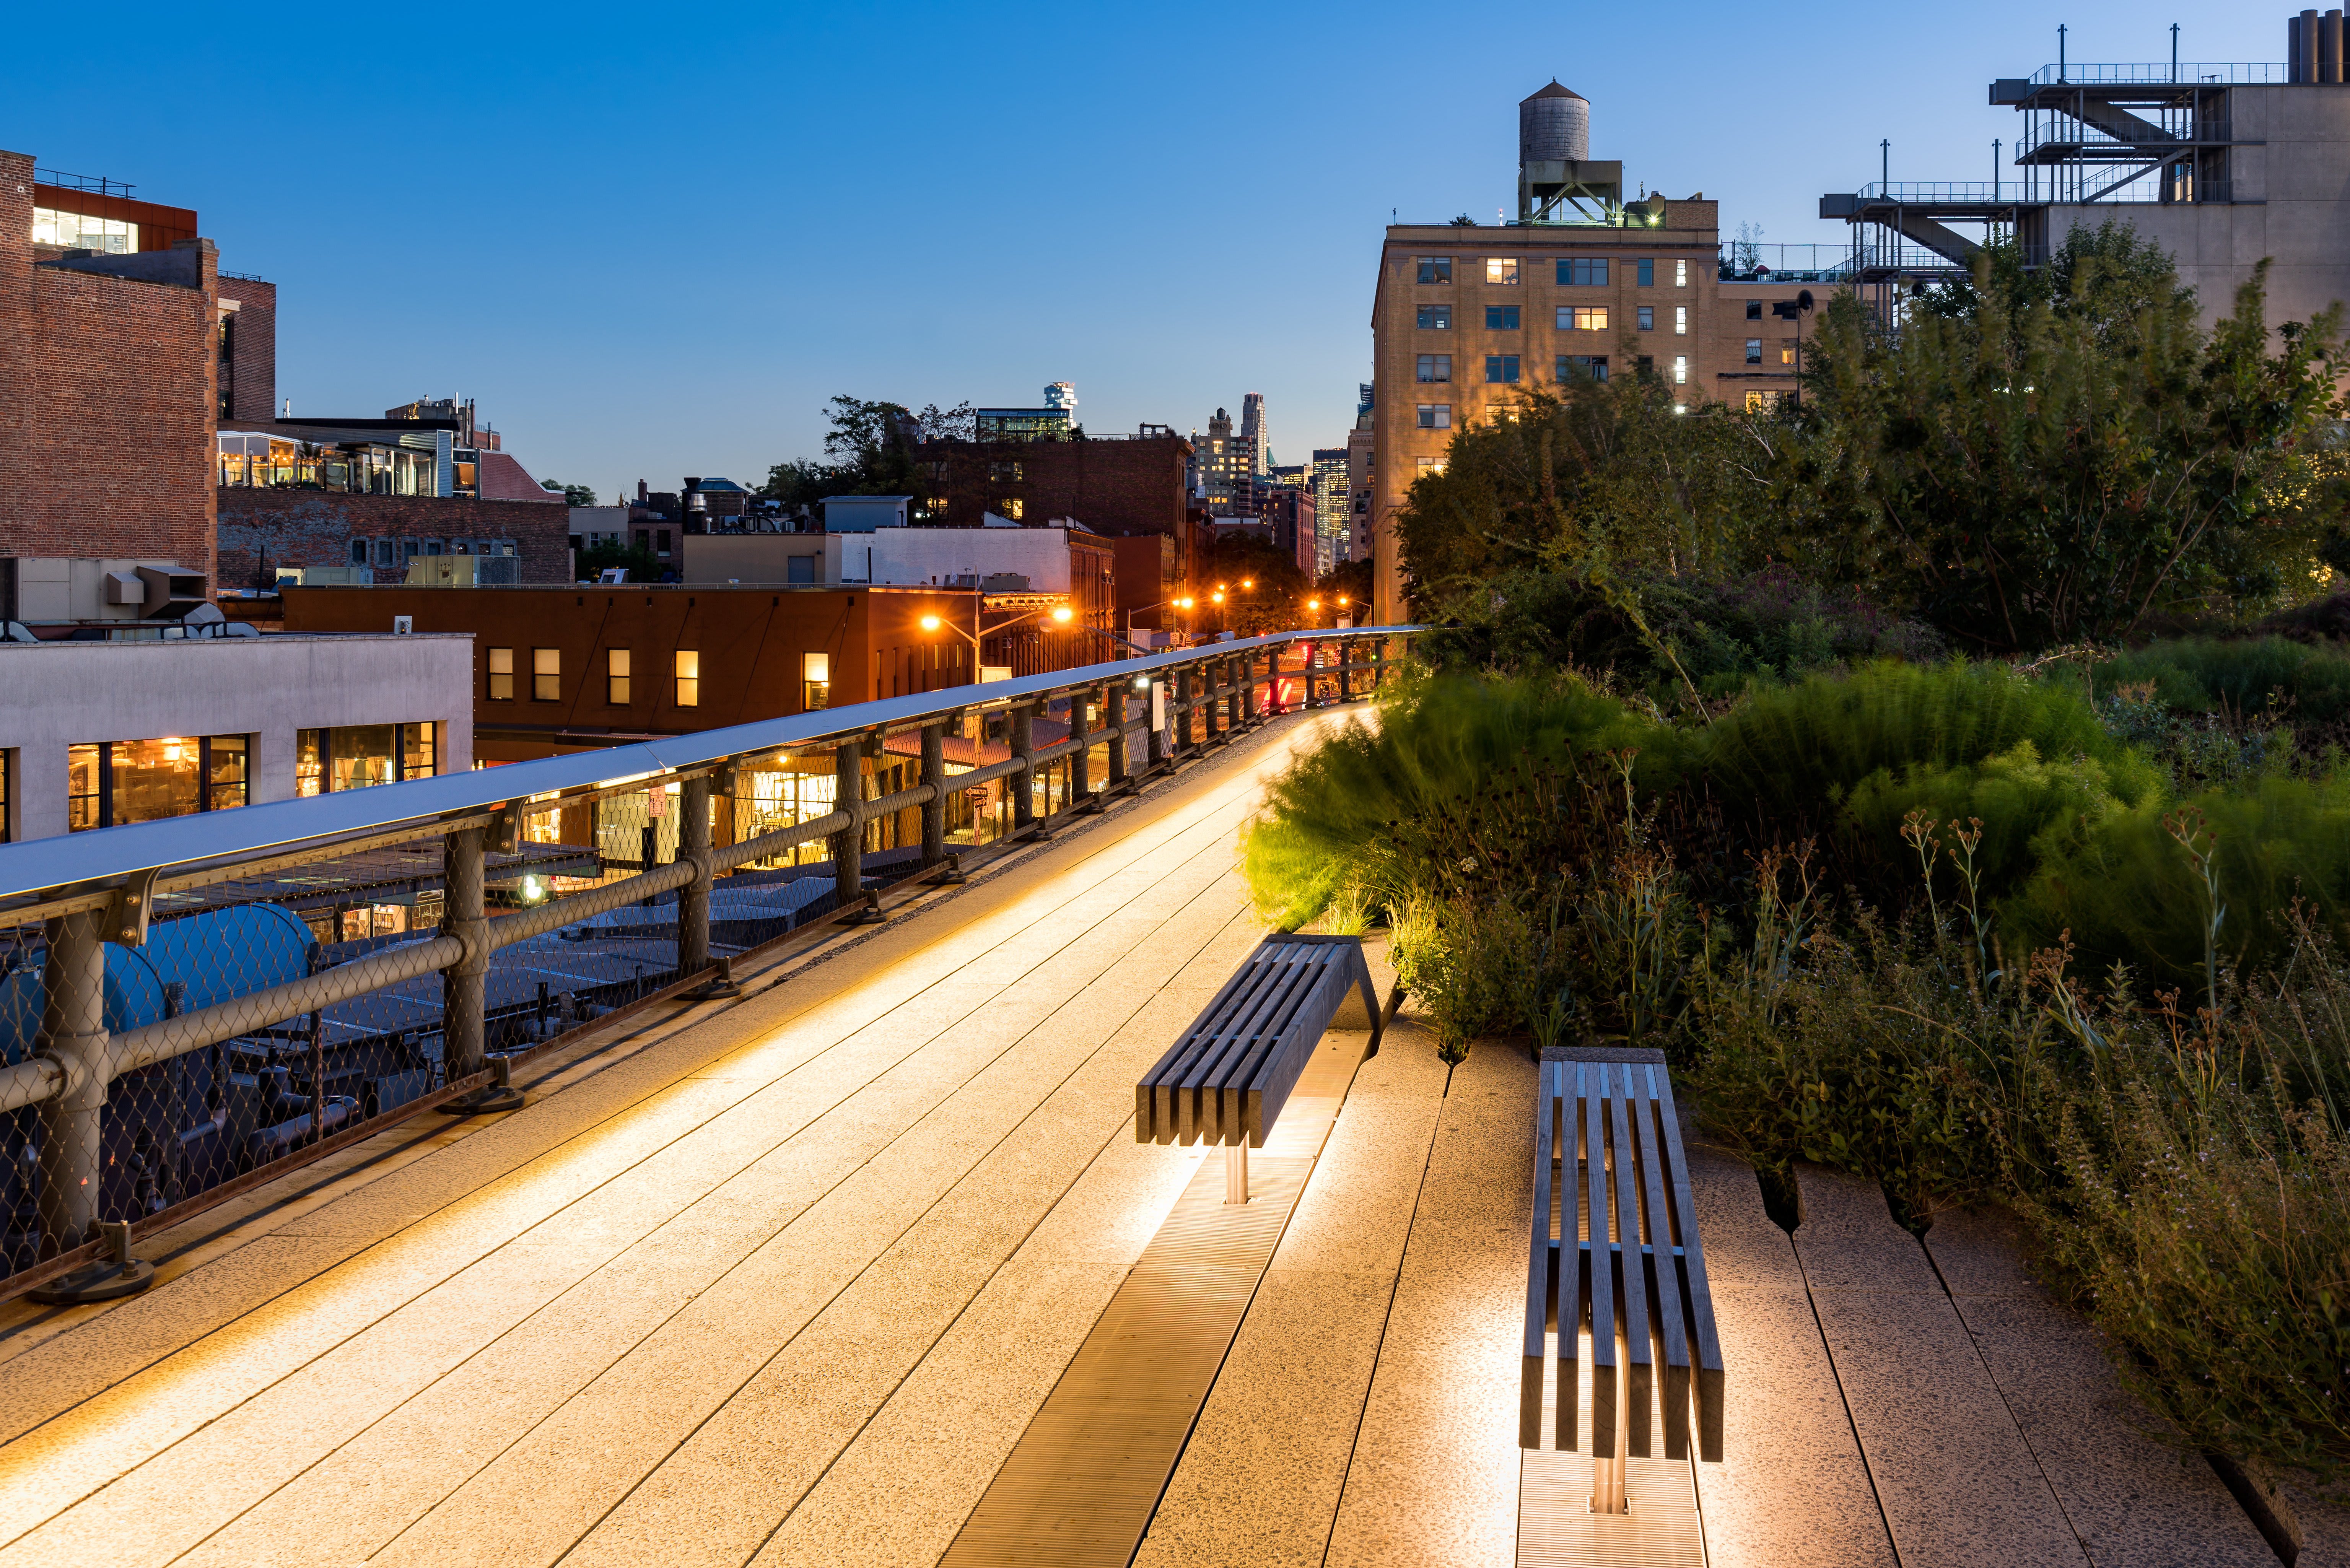 A Guide to the High Line in New York City